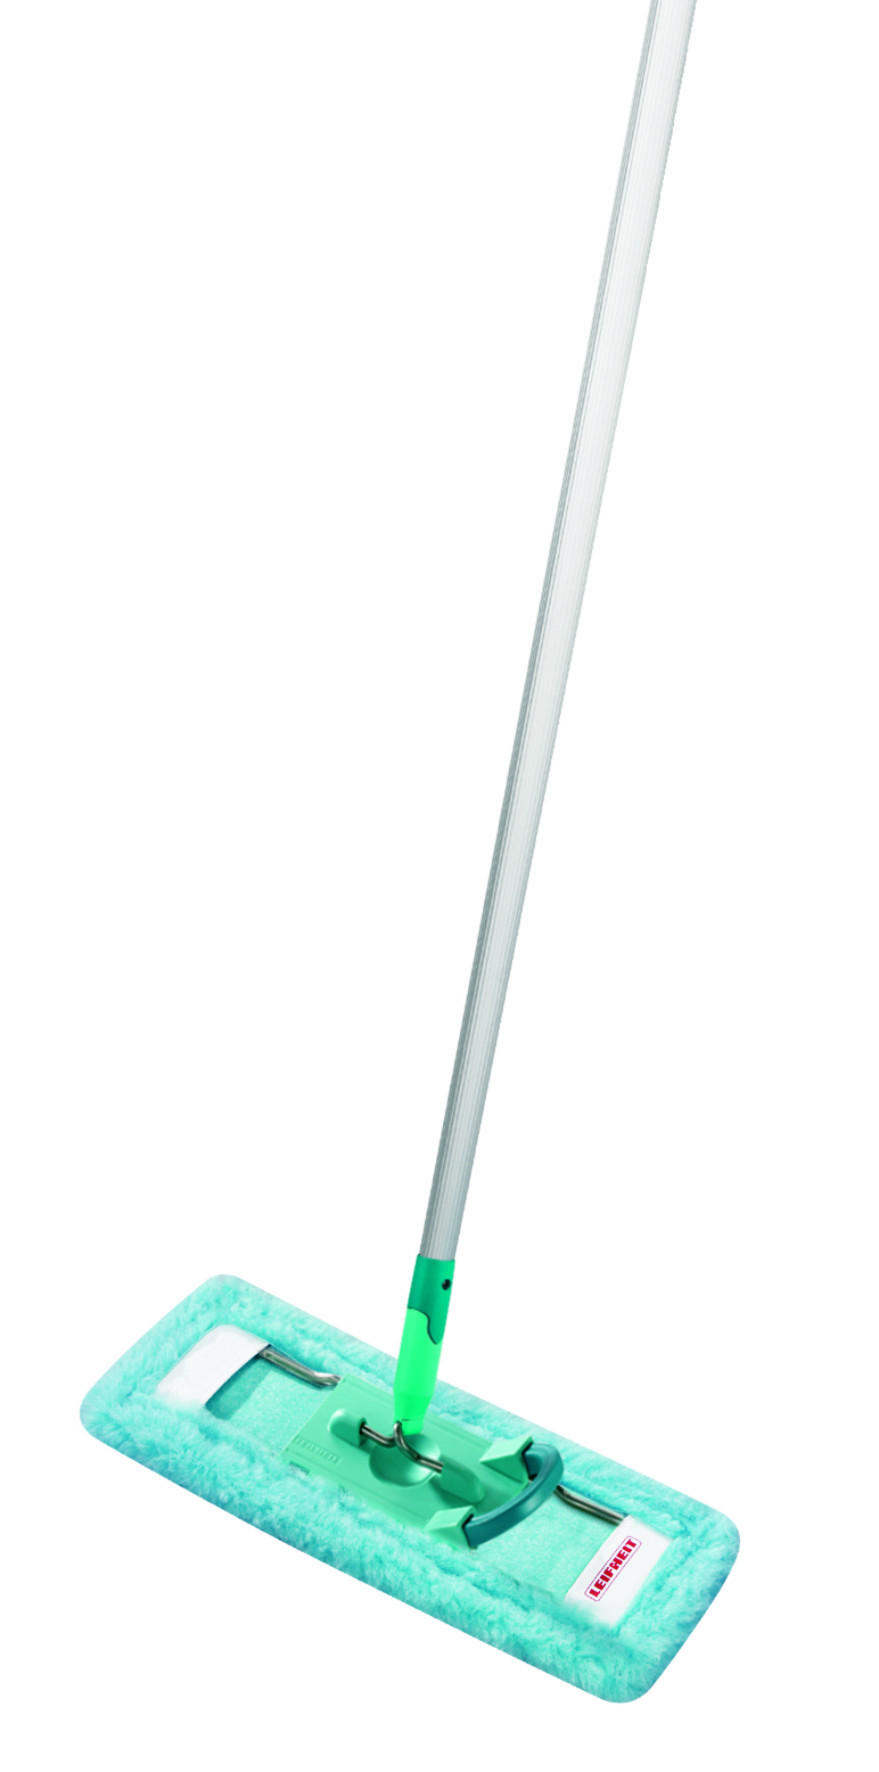 Leifheit 55118 Static Cover for Profi Floor Mop by